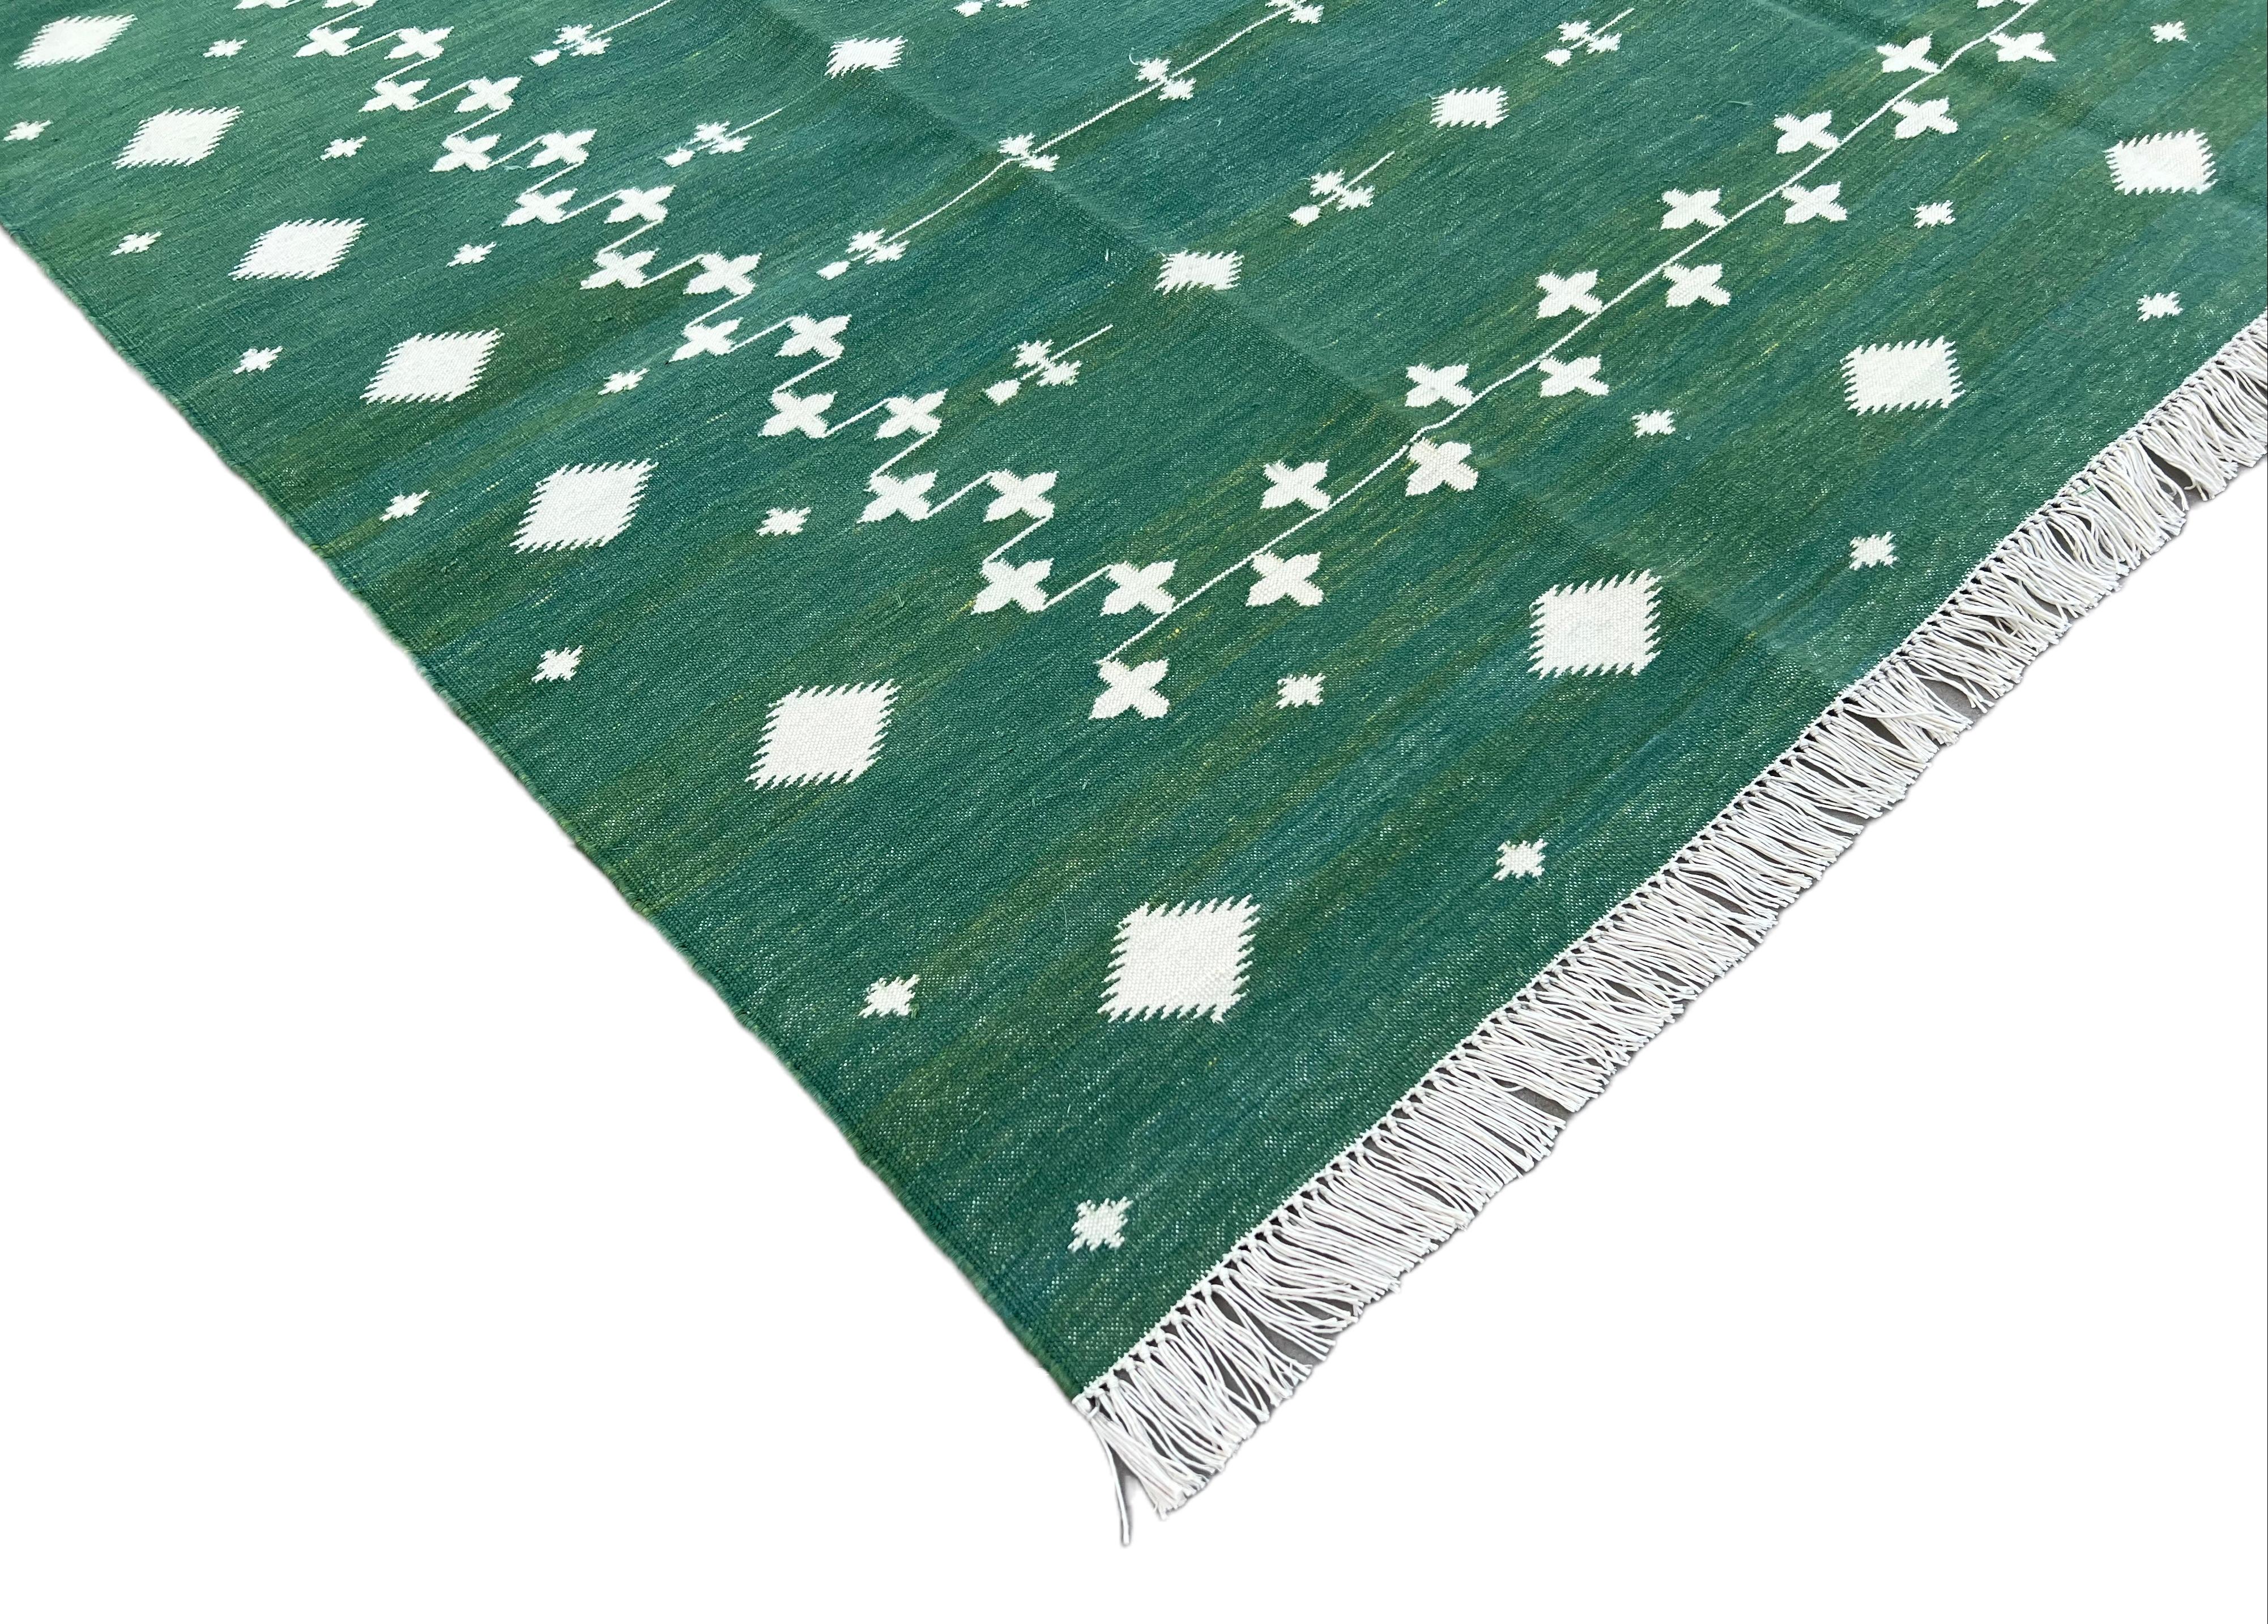 Kilim Handmade Cotton Area Flat Weave Rug, Green & White Indian Shooting Star Dhurrie For Sale